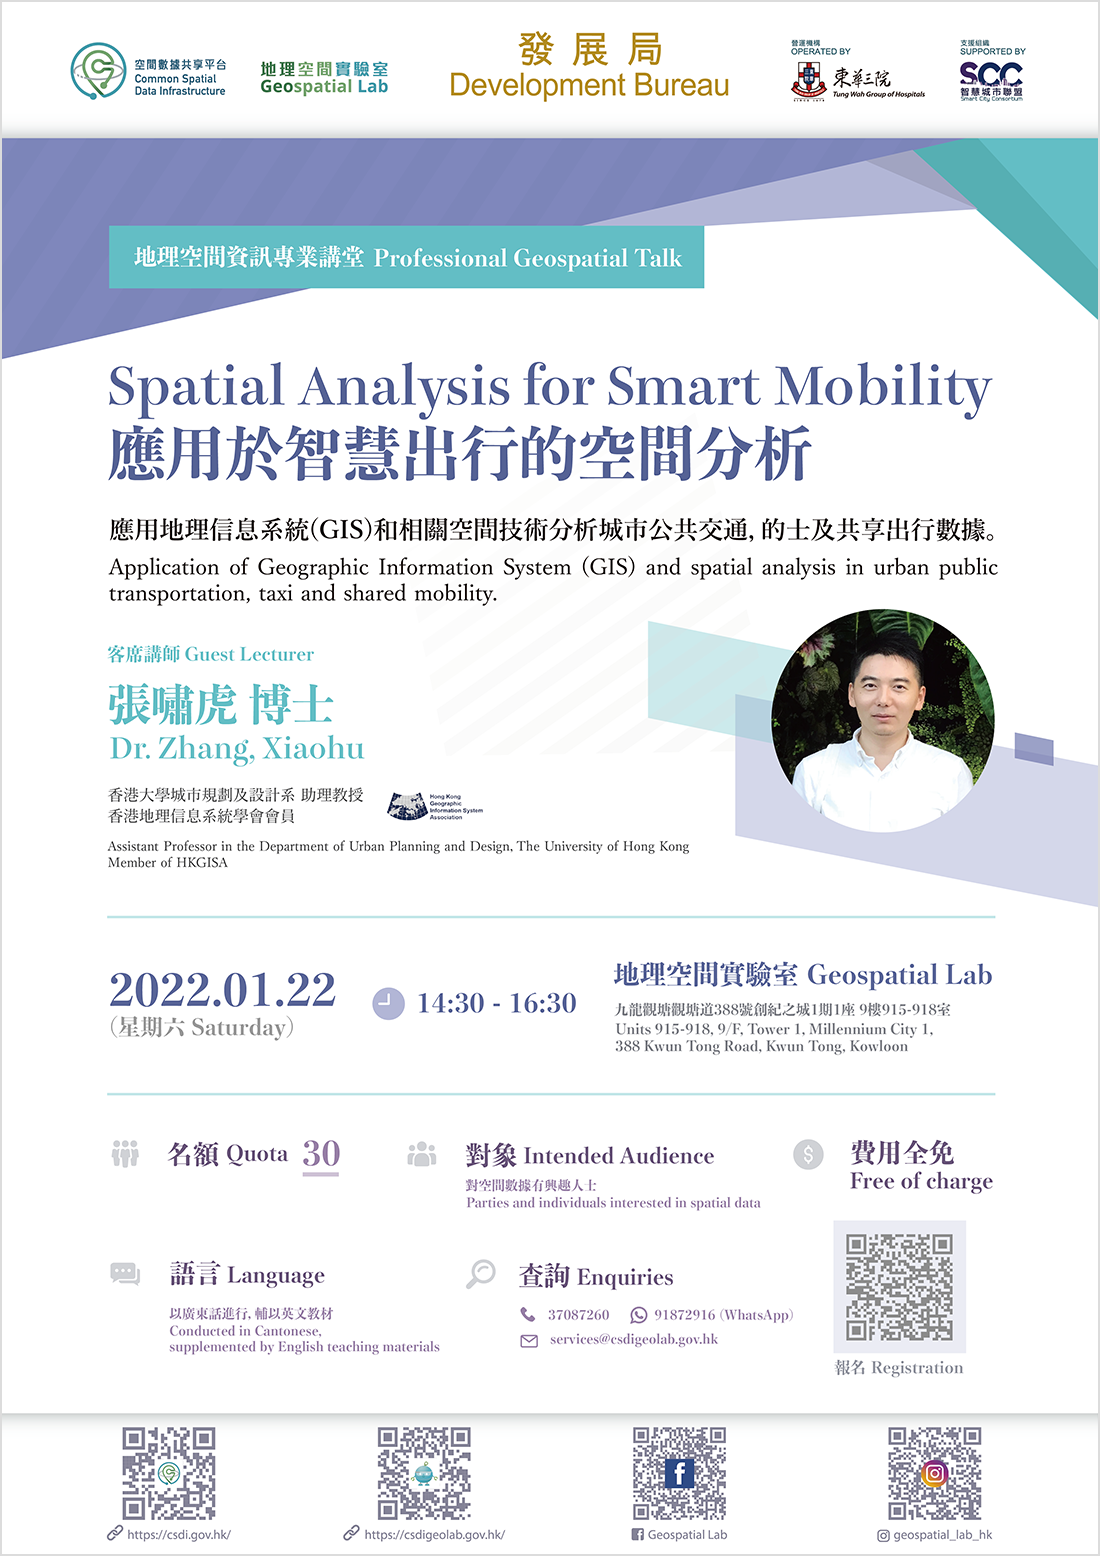 Professional Geospatial Talk - Spatial Analysis for Smart Mobility